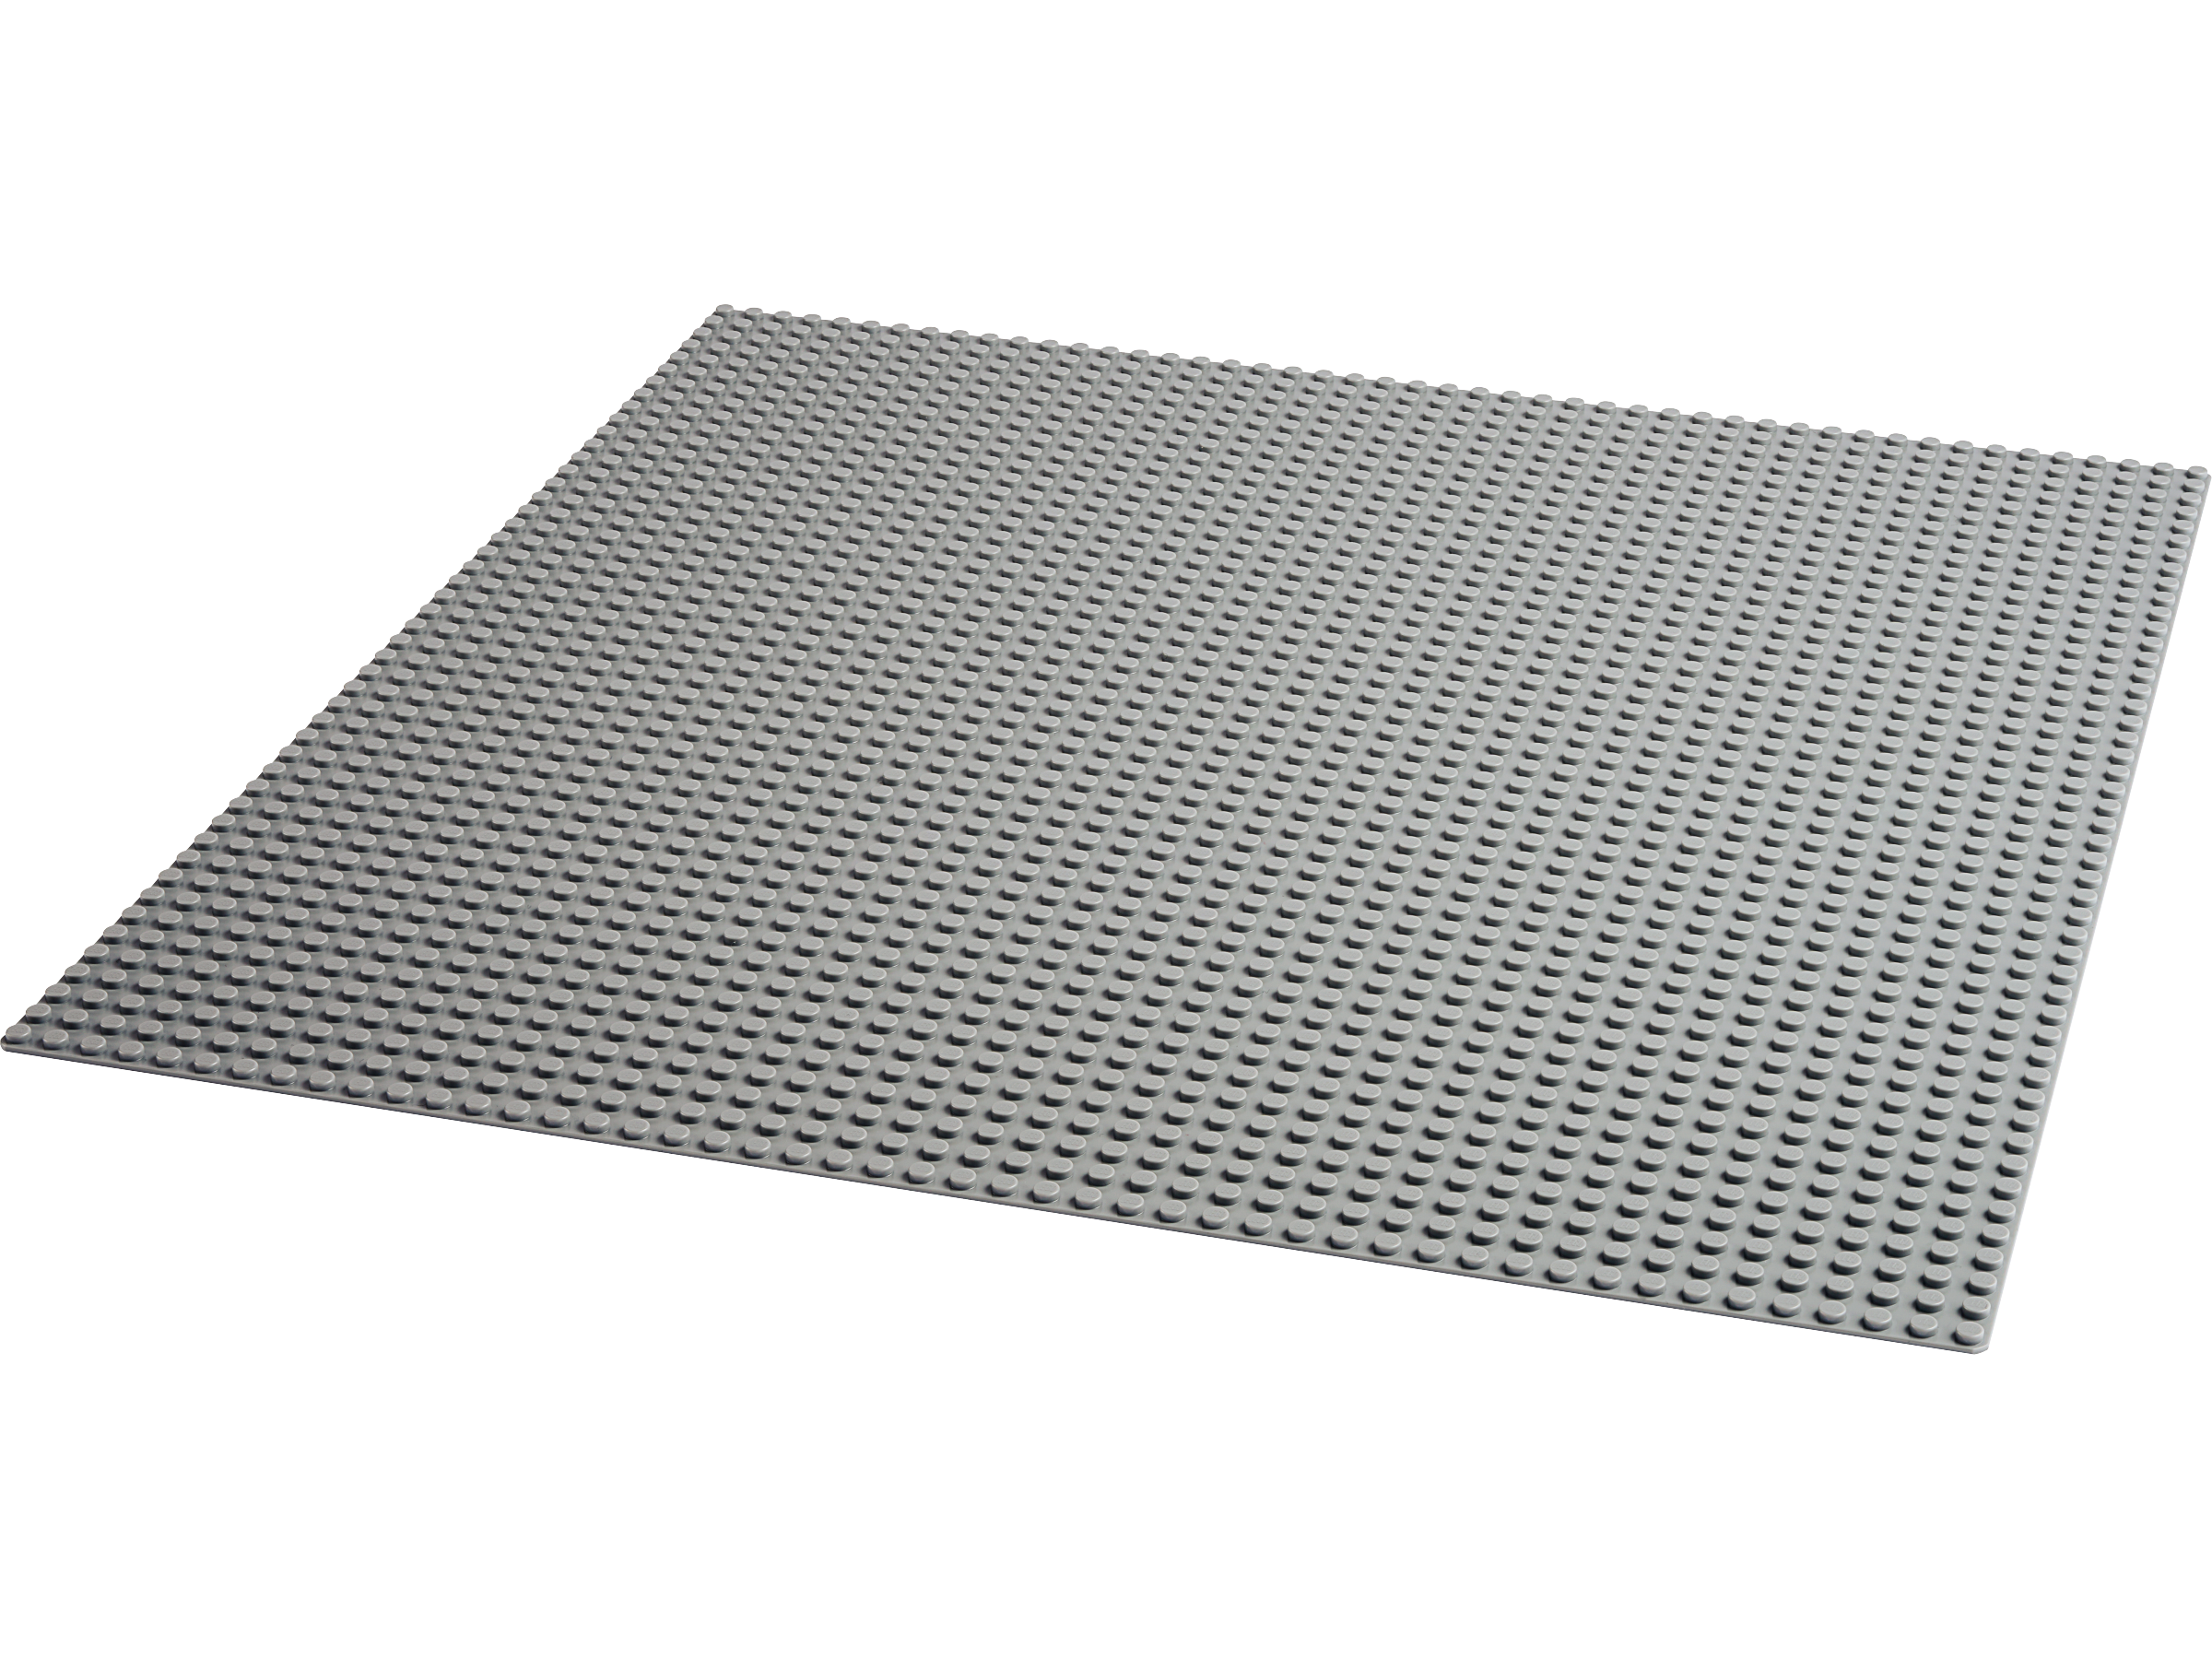 Buy | | online at Gray Official LEGO® Baseplate Classic Shop US the 11024